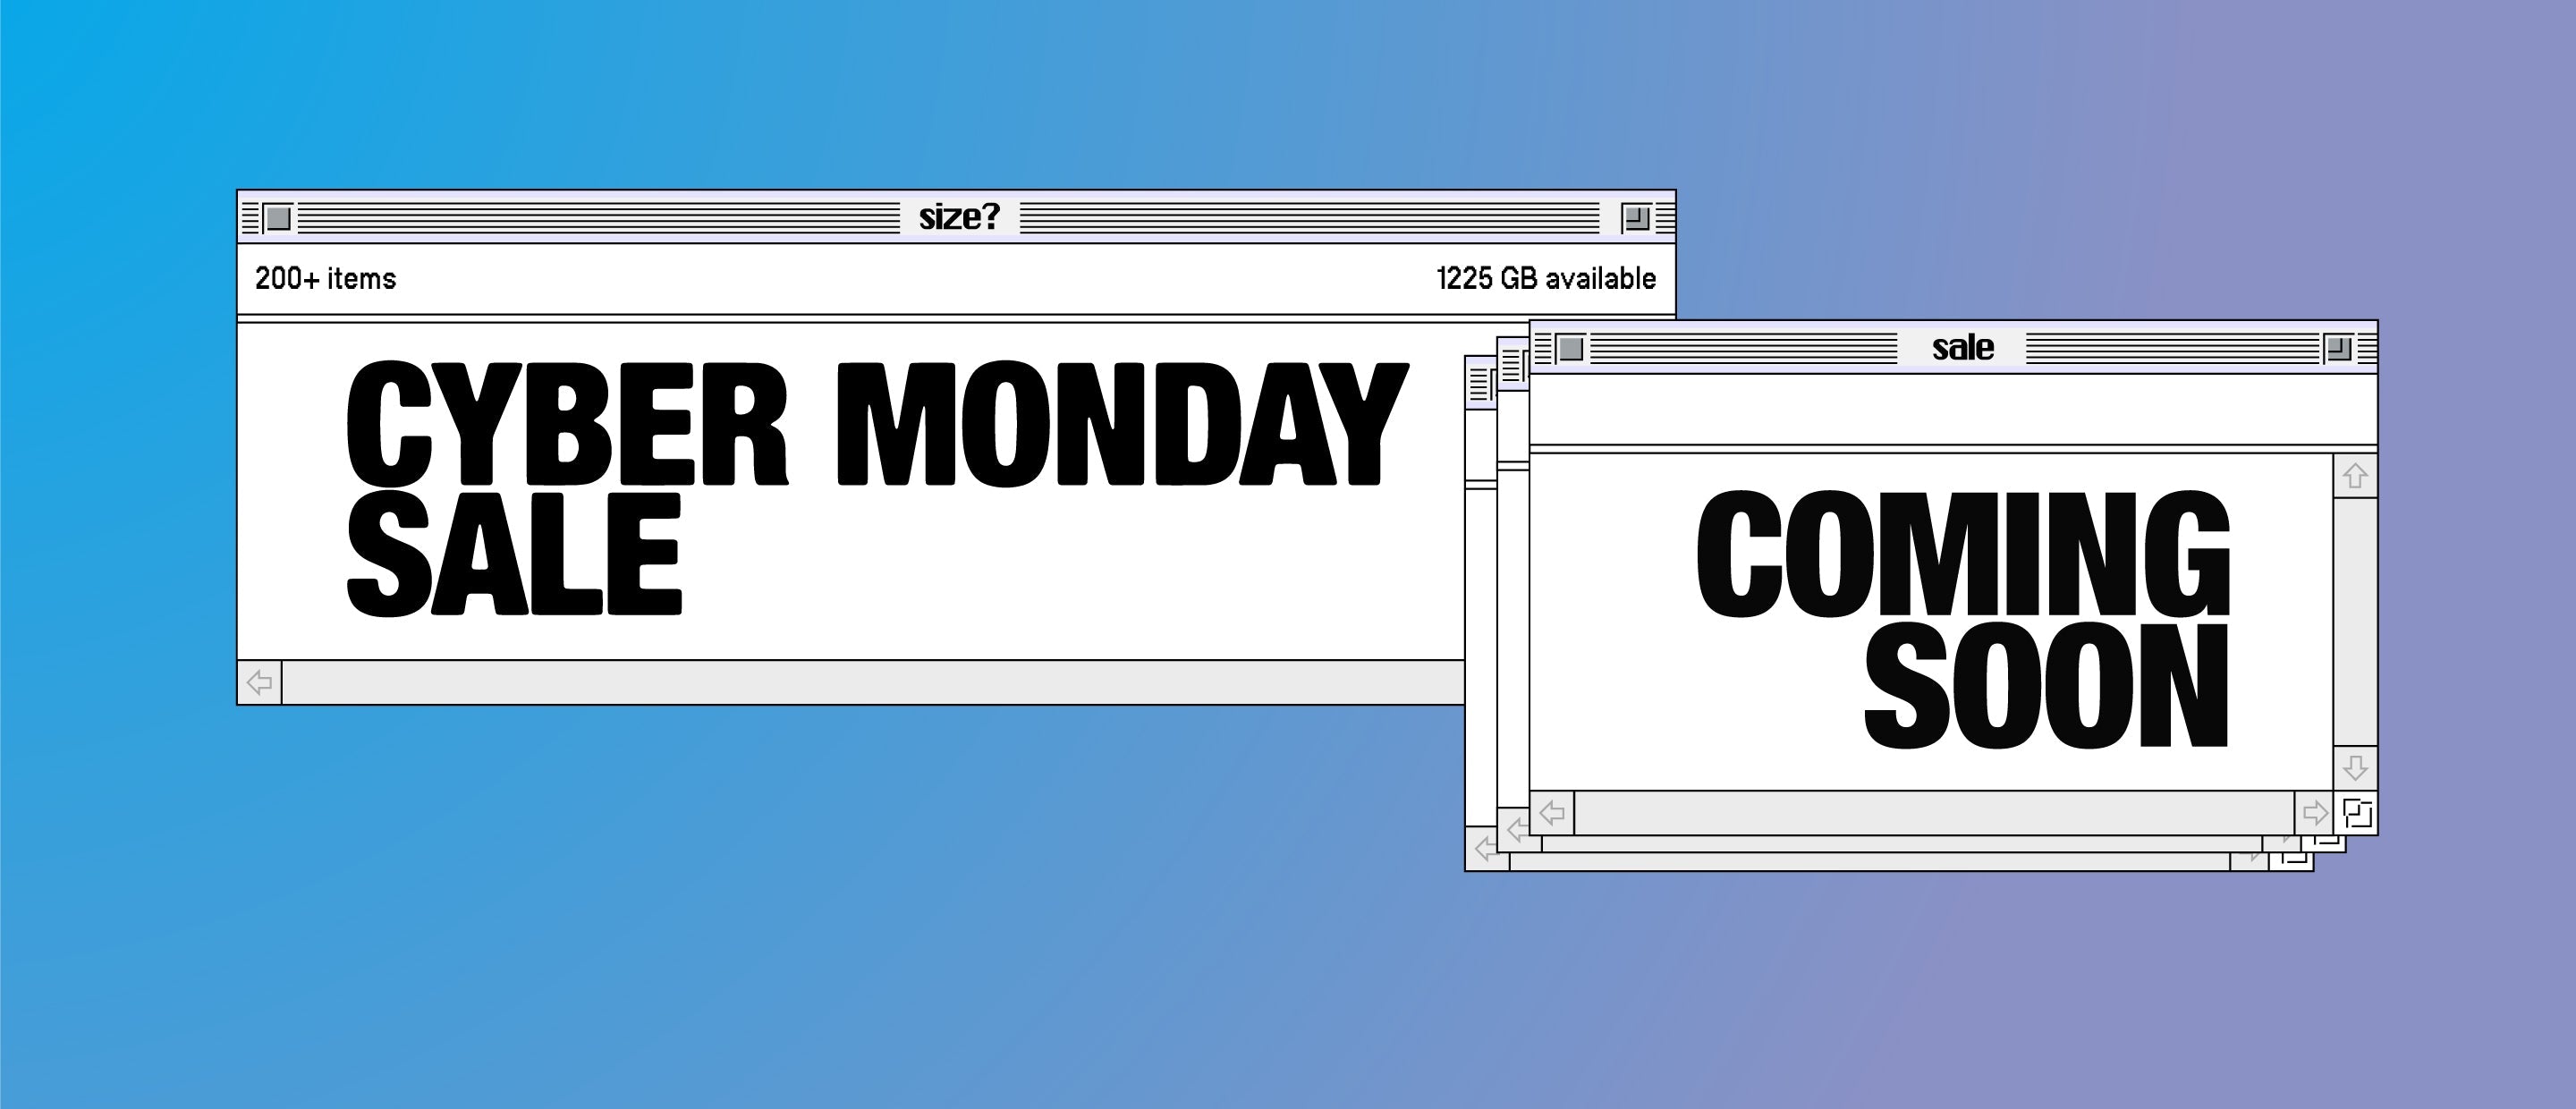 Coming Soon: Cyber Monday Sale